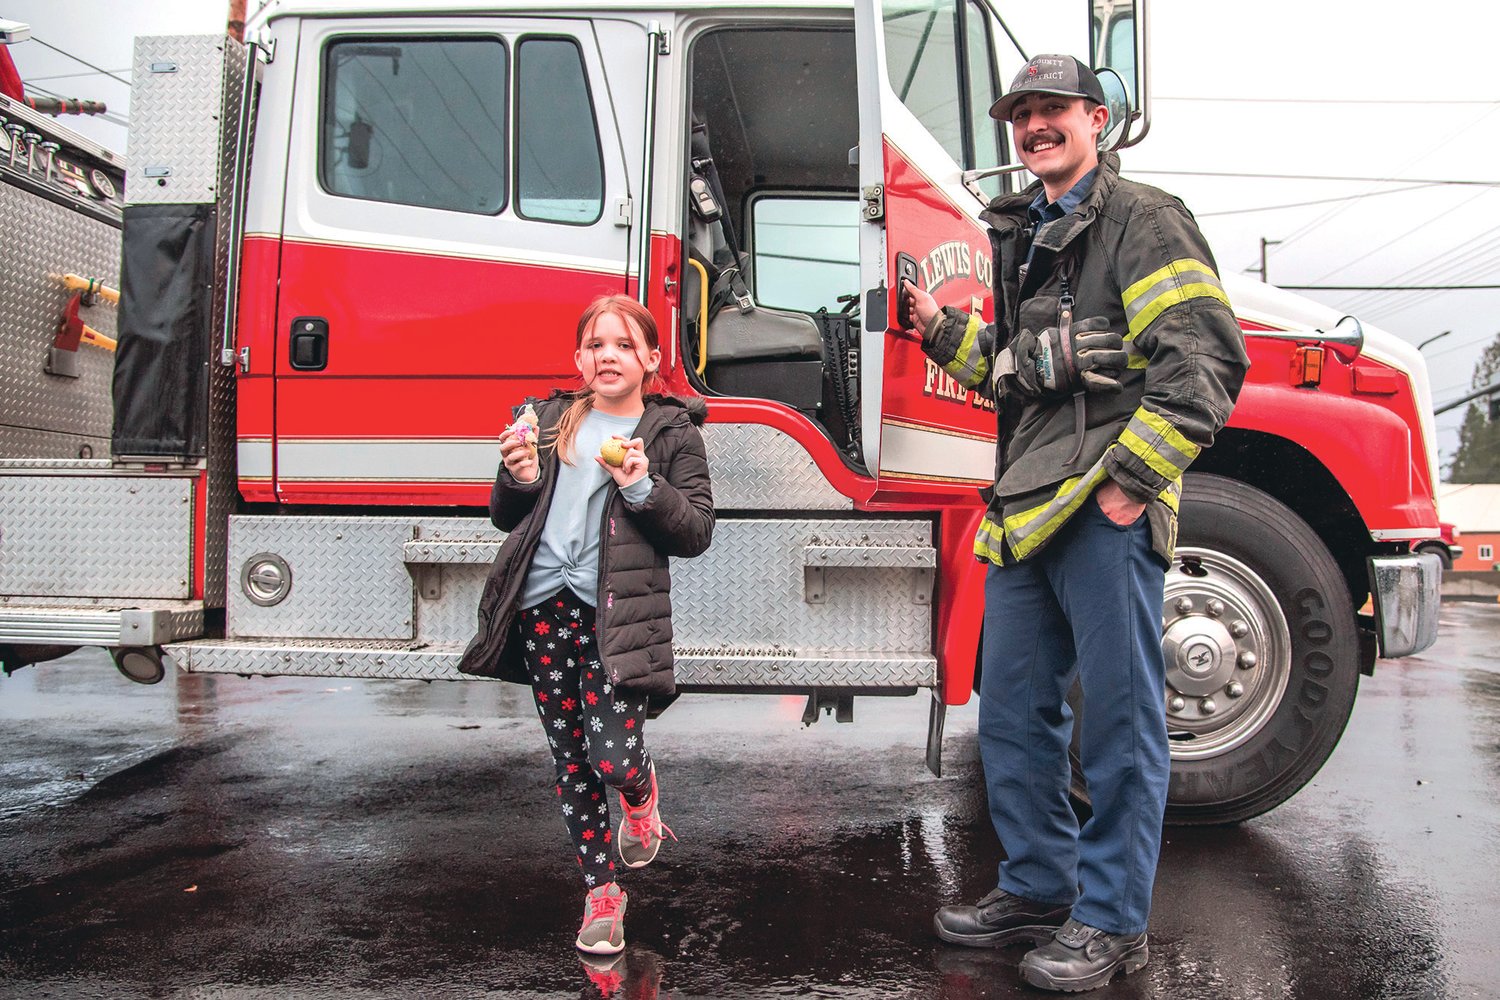 Savannah, a third grader at Napavine Grade School, smiles and poses for a photo with Tyler Correia of Lewis County Fire District 5 Monday in Napavine.